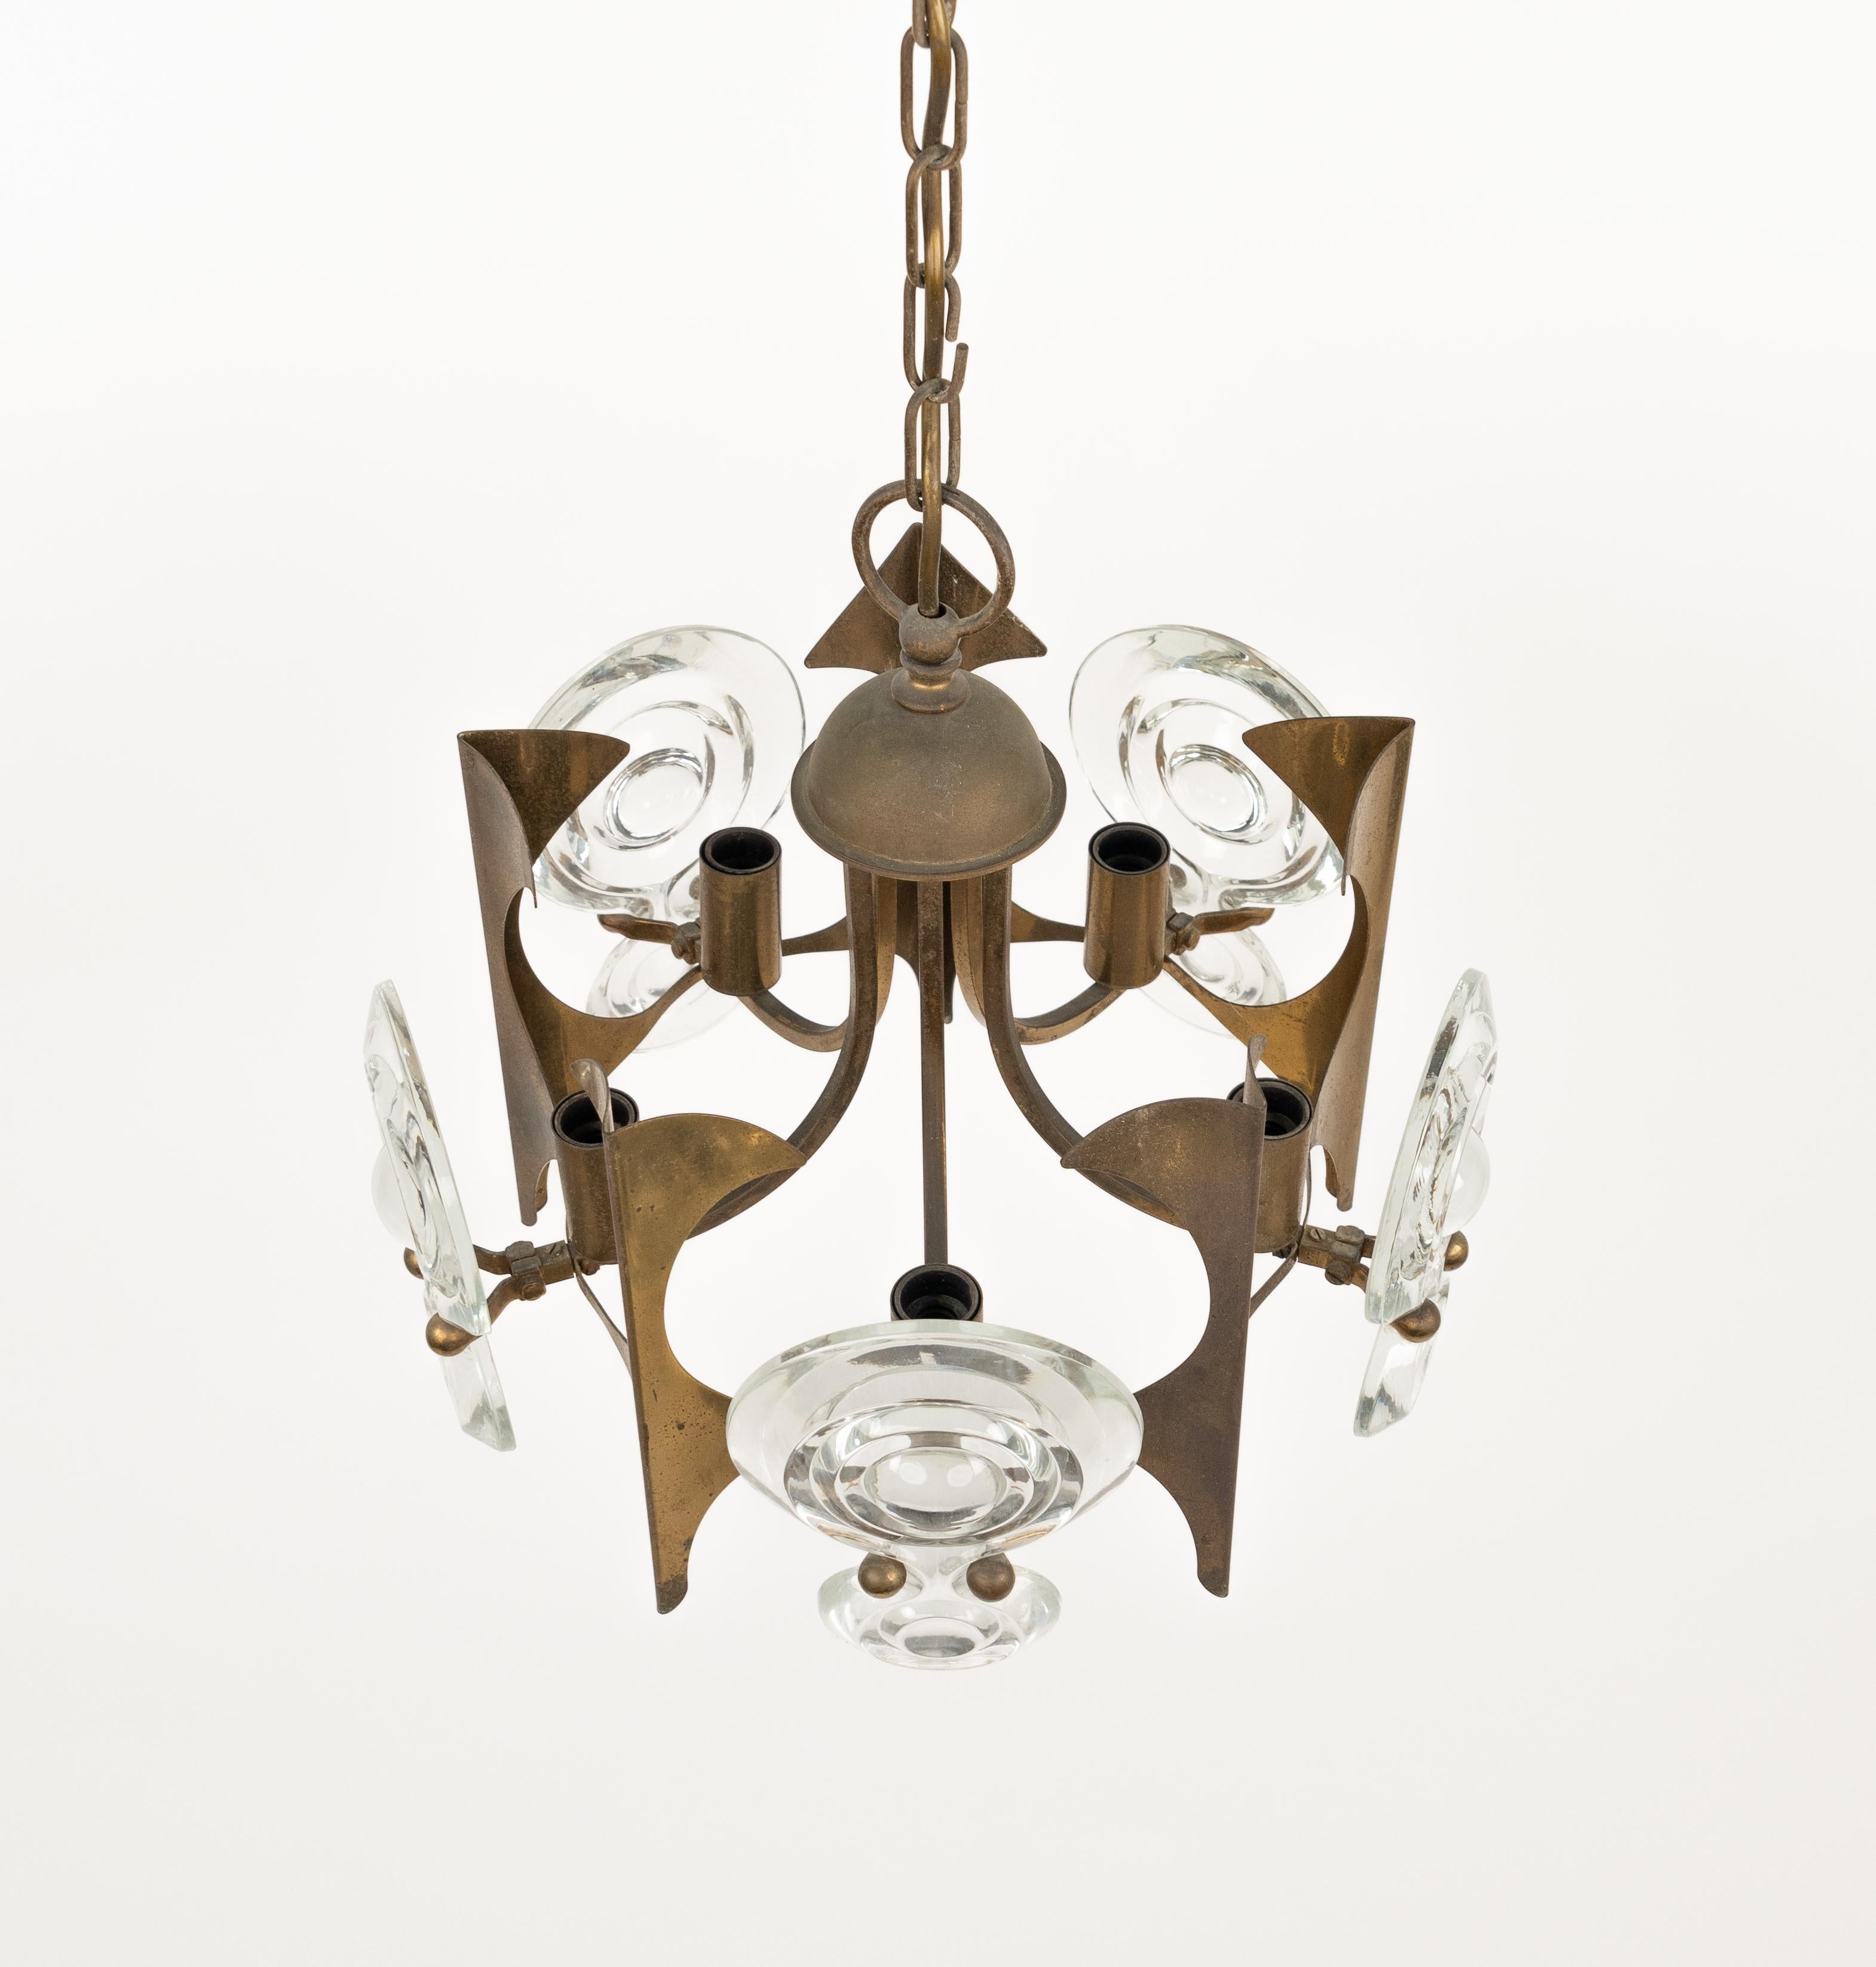 Mid-20th Century Midcentury Chandelier Brass and Glass by Oscar Torlasco, Italy 1960s For Sale